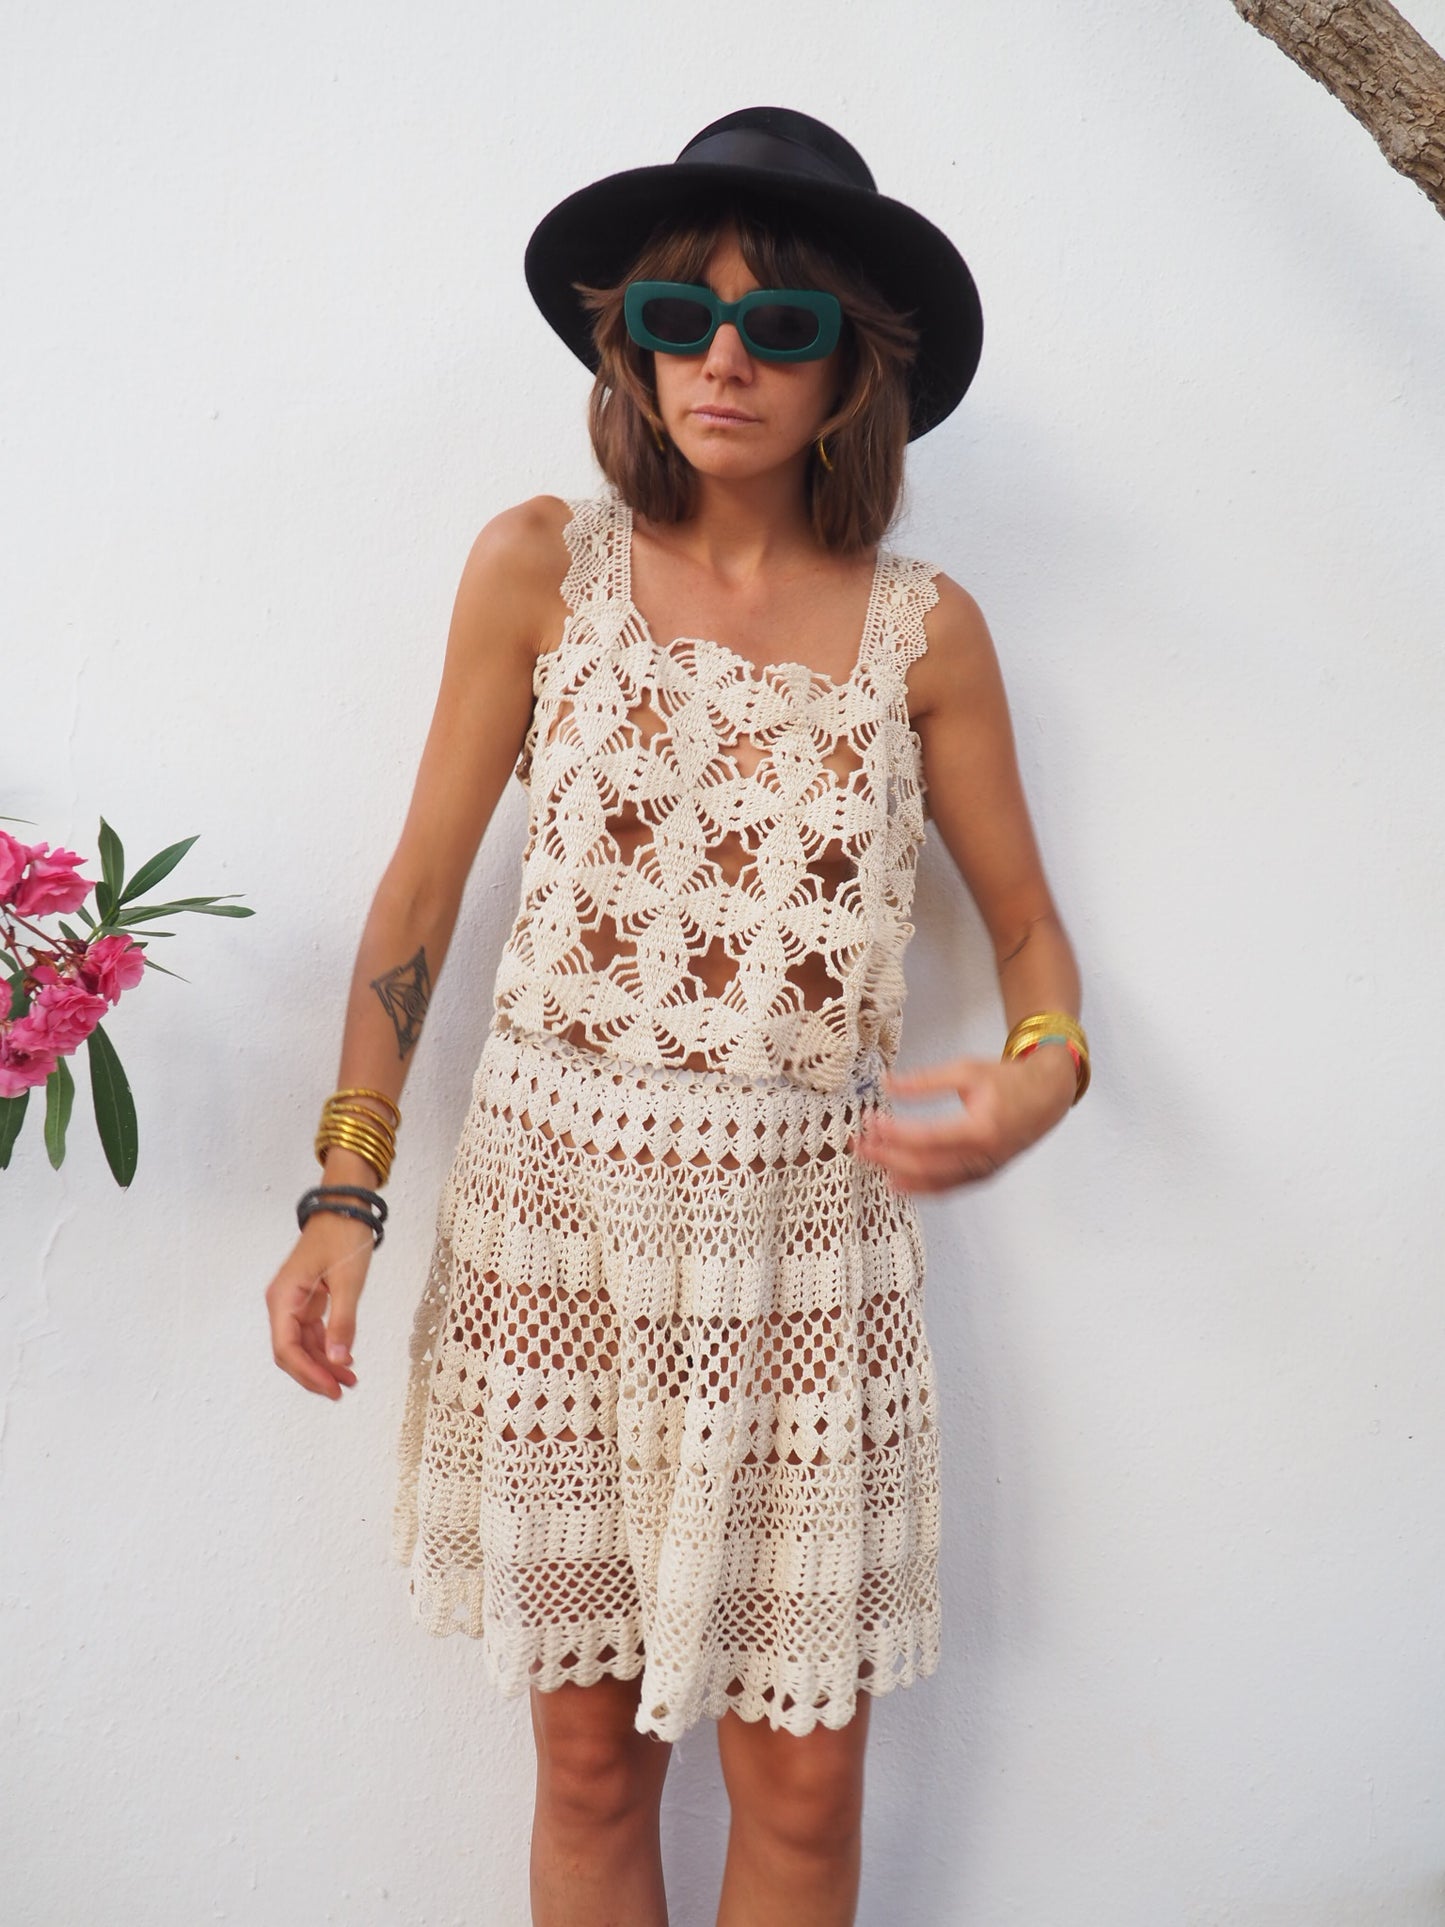 Amazing one of a kind vintage crochet lace skirt up-cycled by Vagabond Ibiza